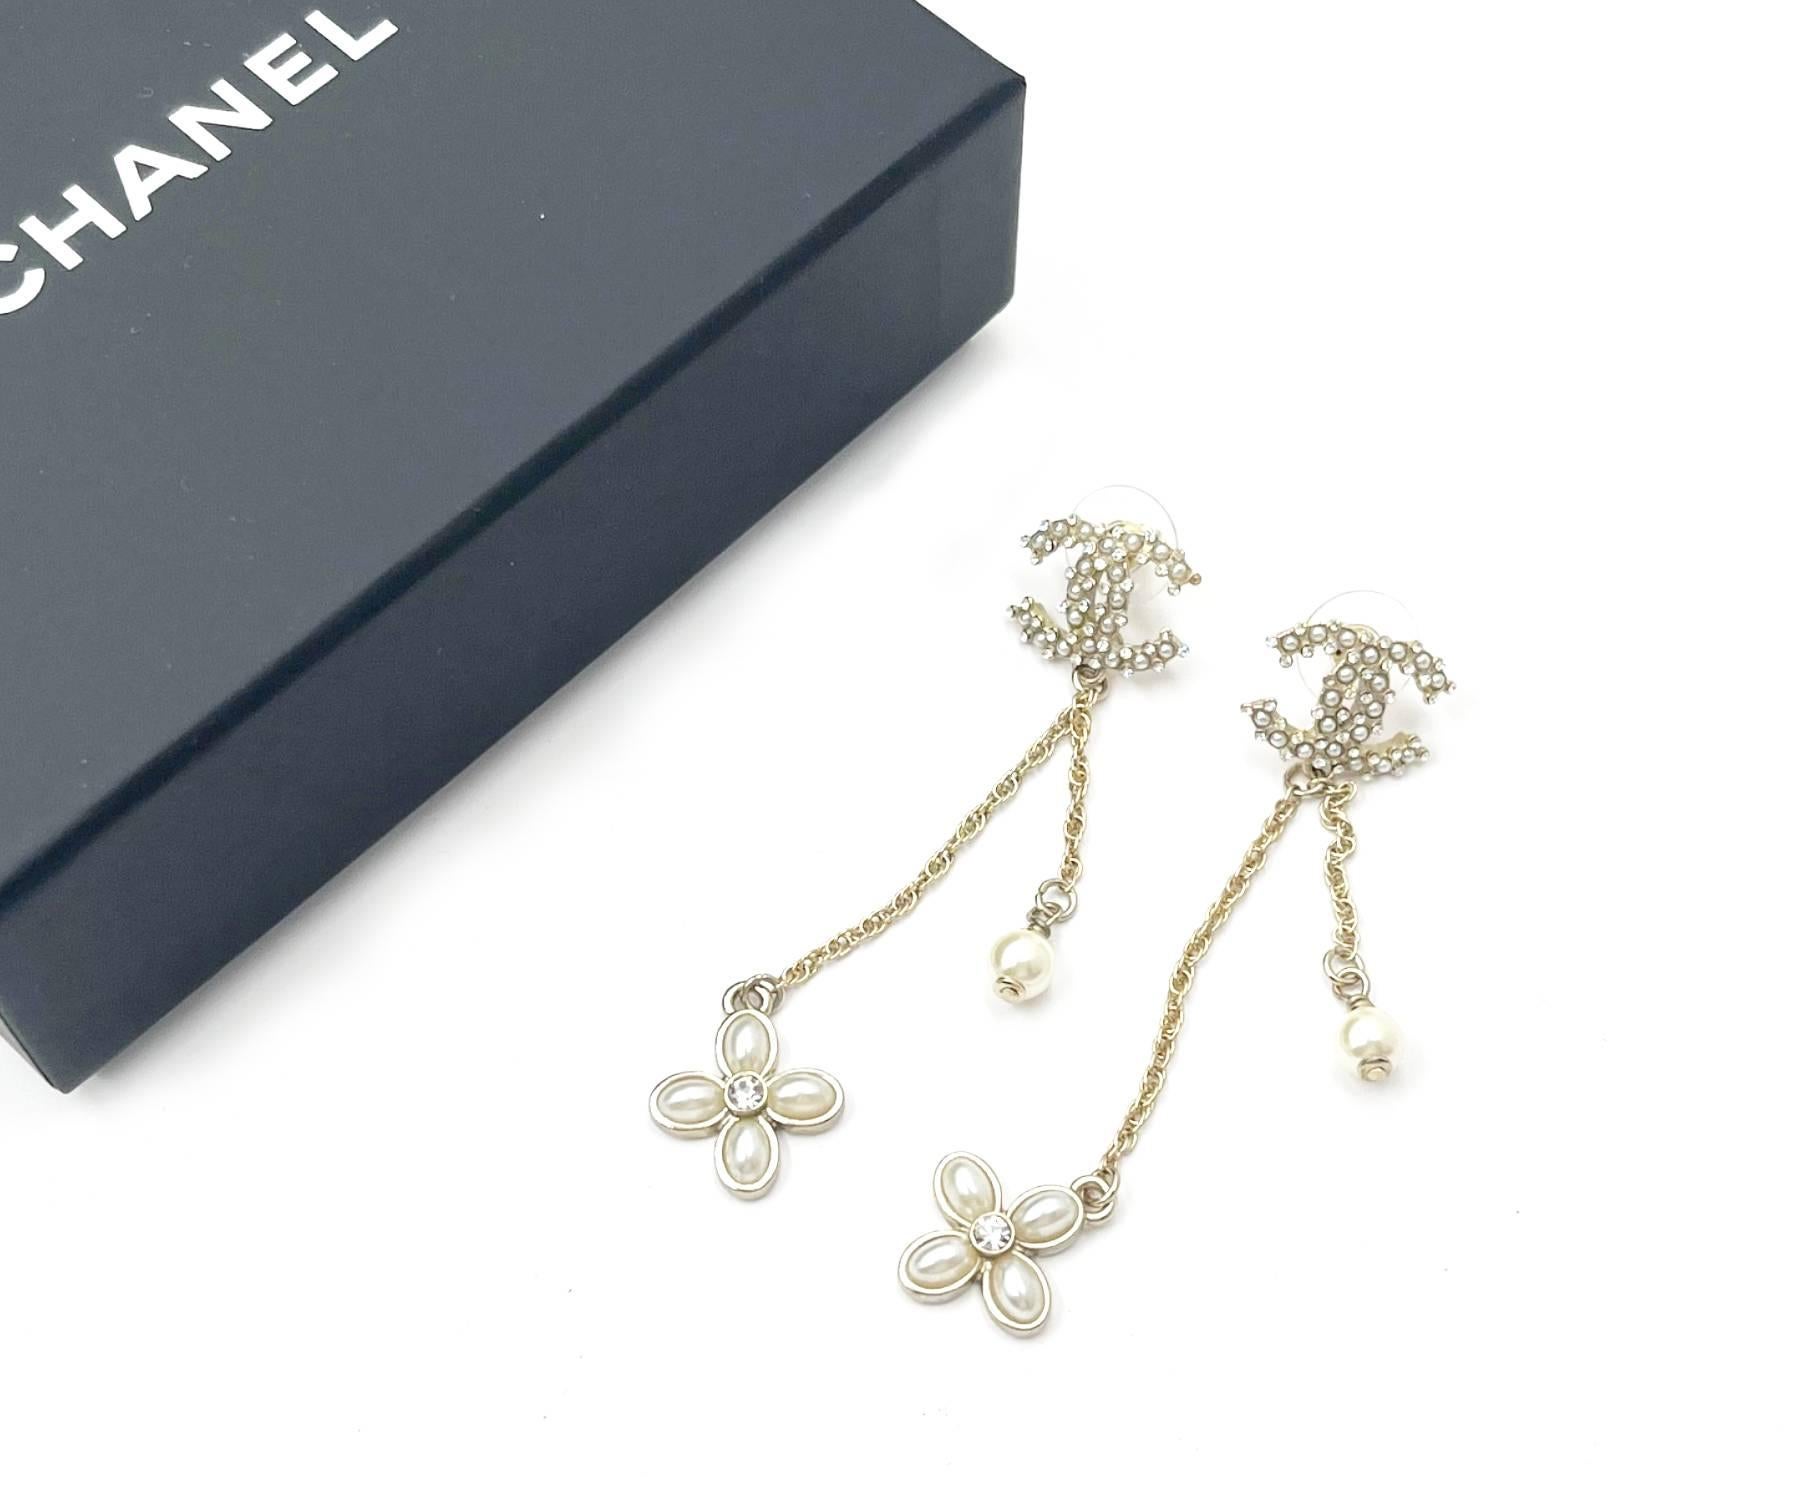 Chanel Gold CC Mini Pearl Crystal Clover Pearl Dangle Piercing Earrings

* Marked 20
* Made in France
* Comes with the original box and pouch

-It is approximately 3.1